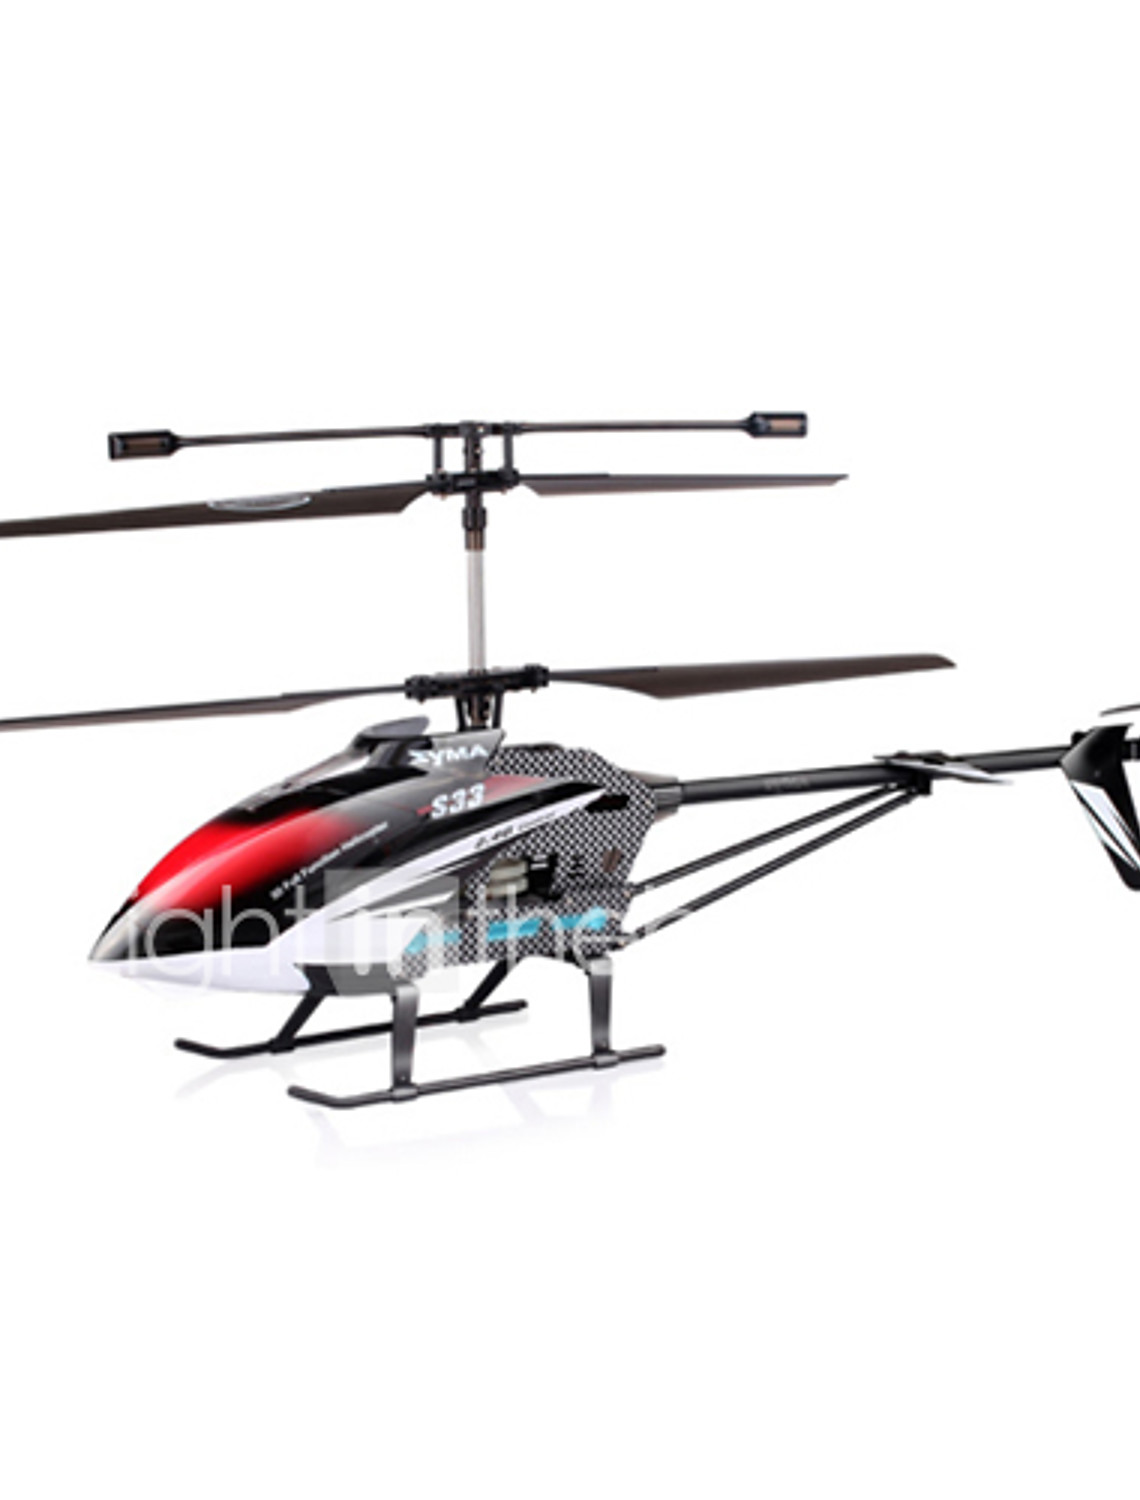 s33 2.4 g helicopter